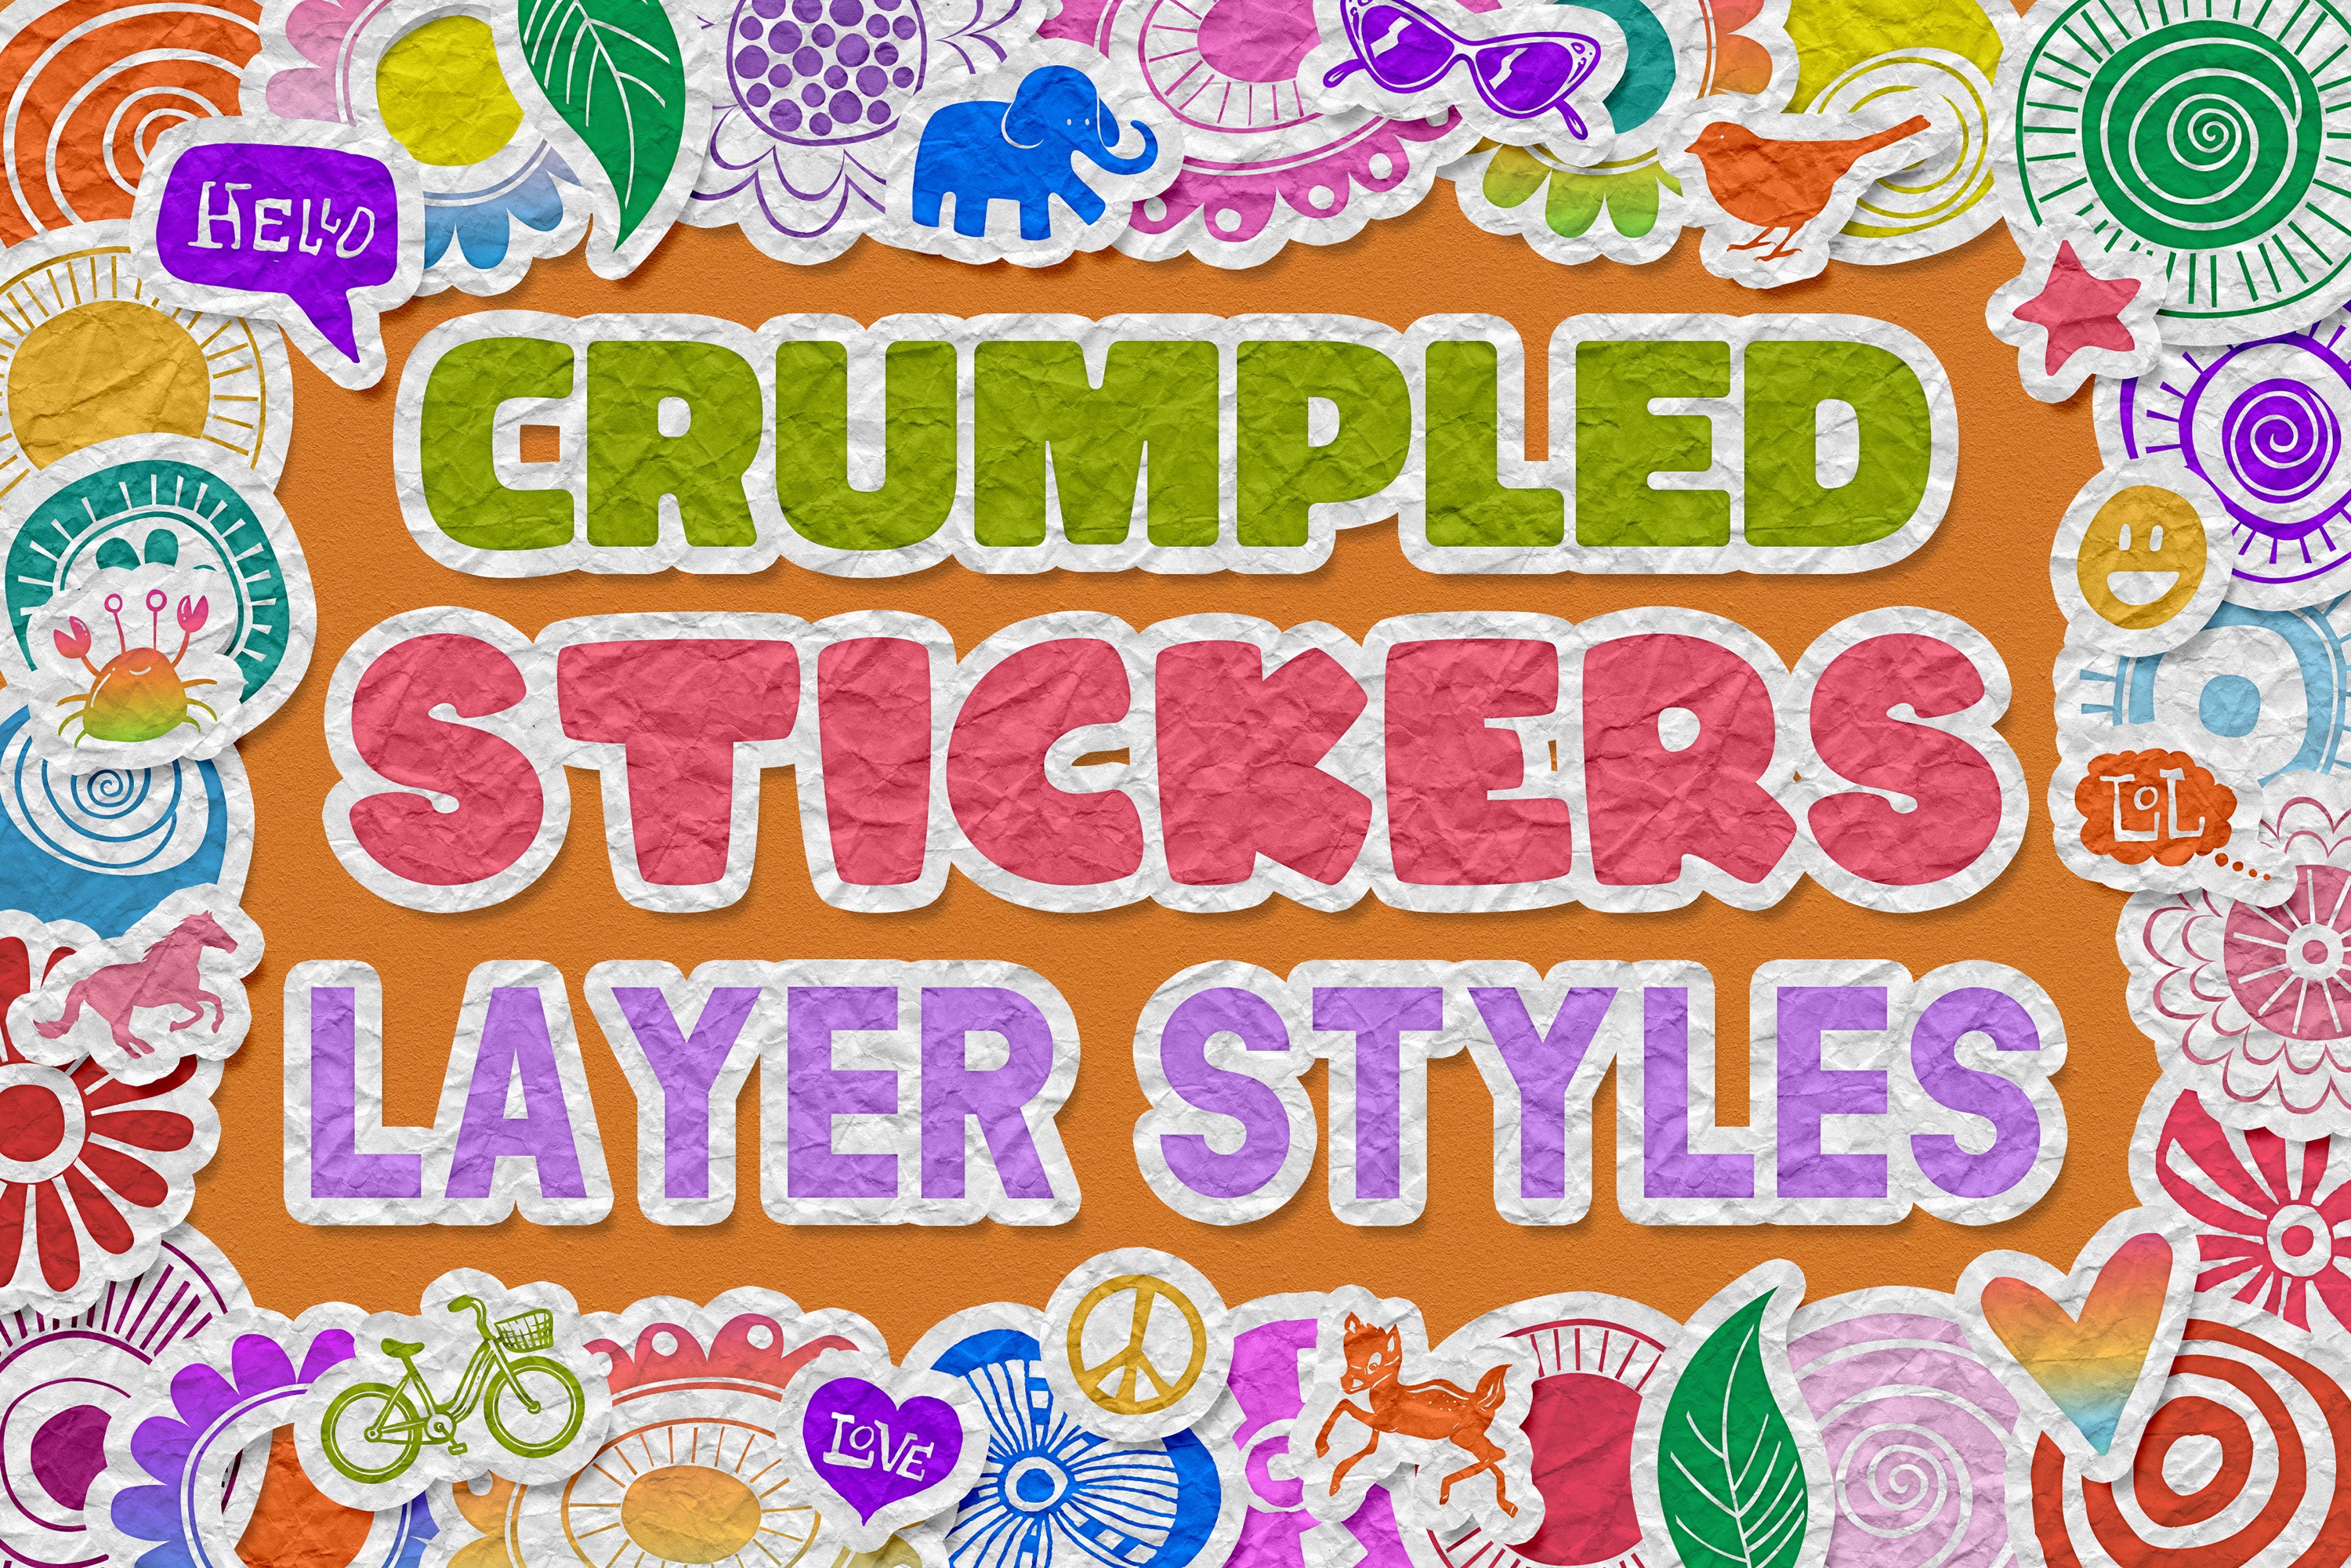 Crumpled Stickers Layer Stylescover image.